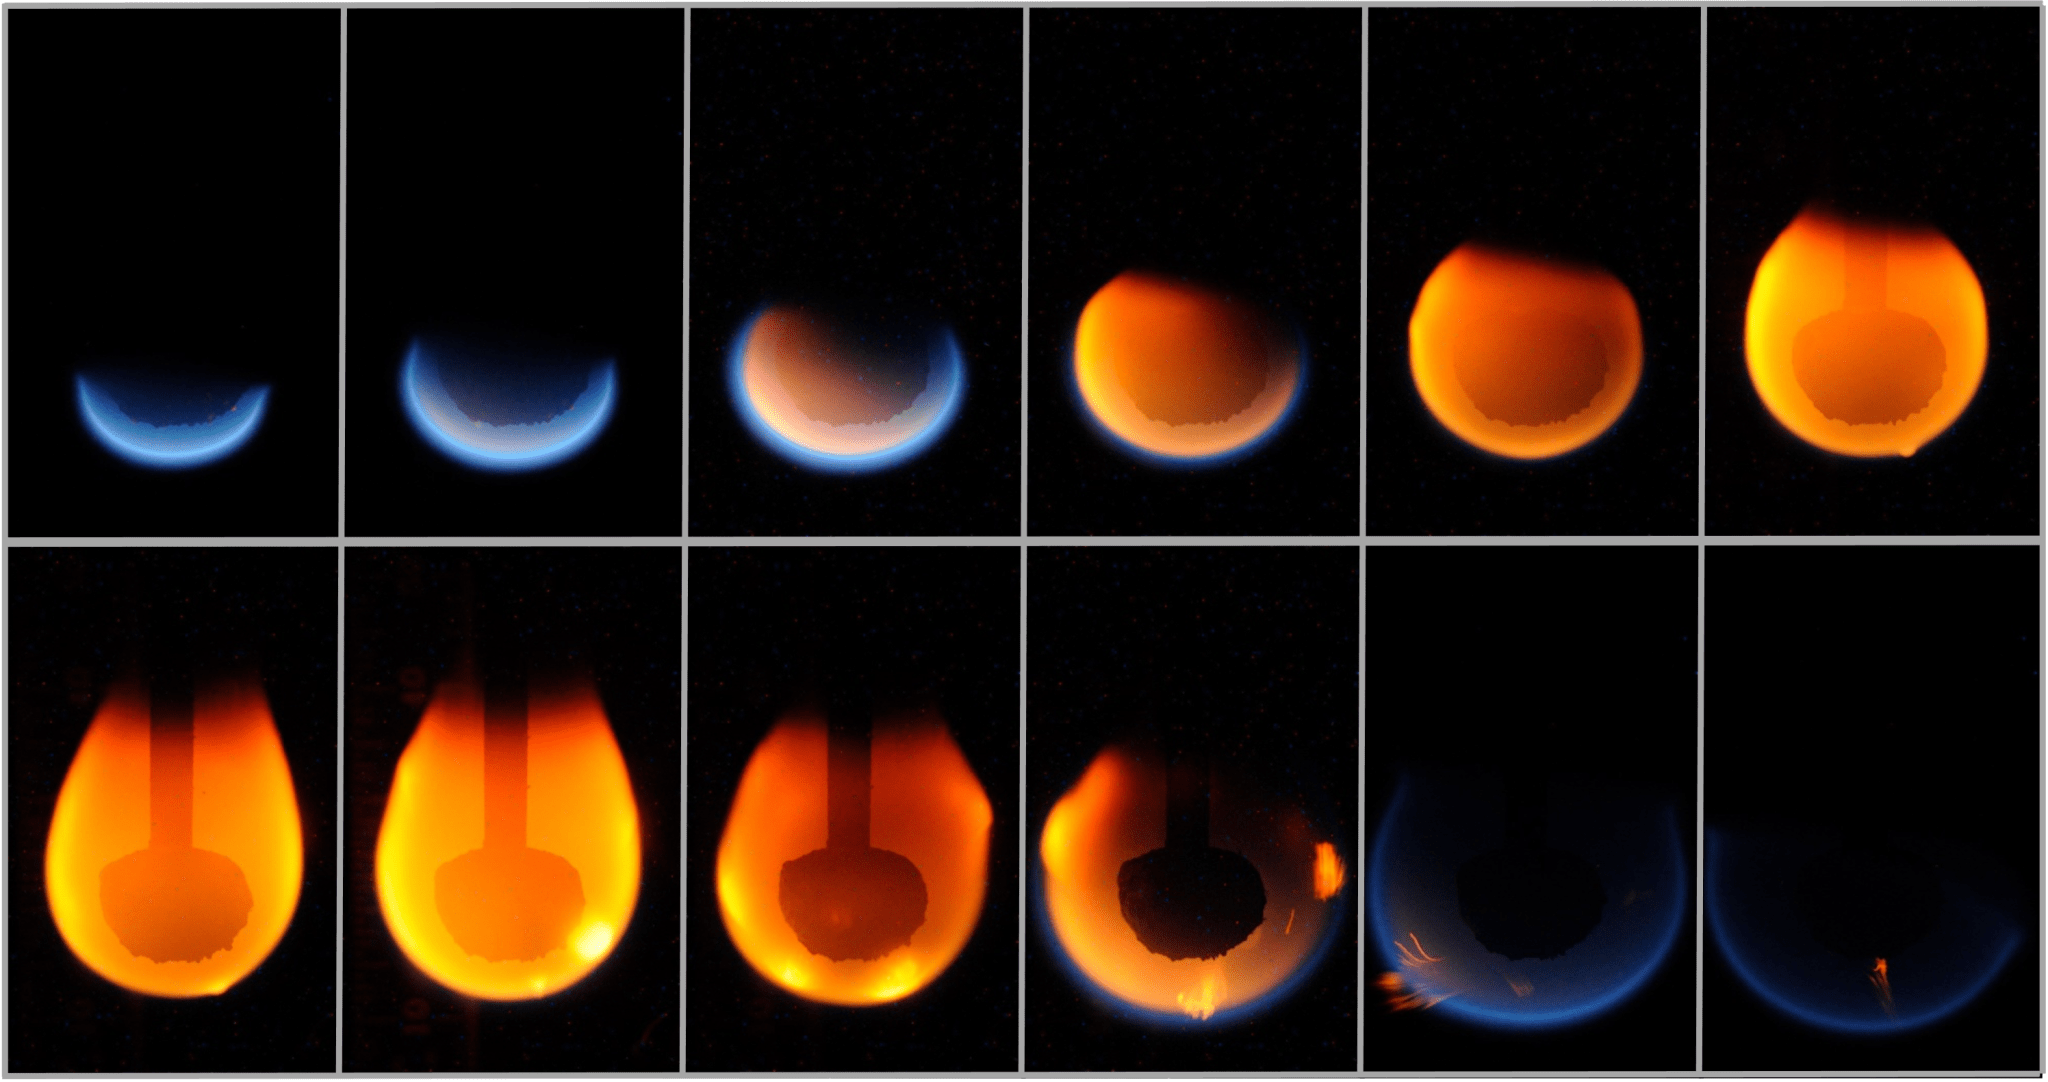 To demonstrate flame growth, decay, and extinction in space, a preliminary test called Burning and Suppression of Solids (BASS) burned a synthetic resin on the space station several years ago. The top row shows the flame growing, while the bottom row shows it going out.